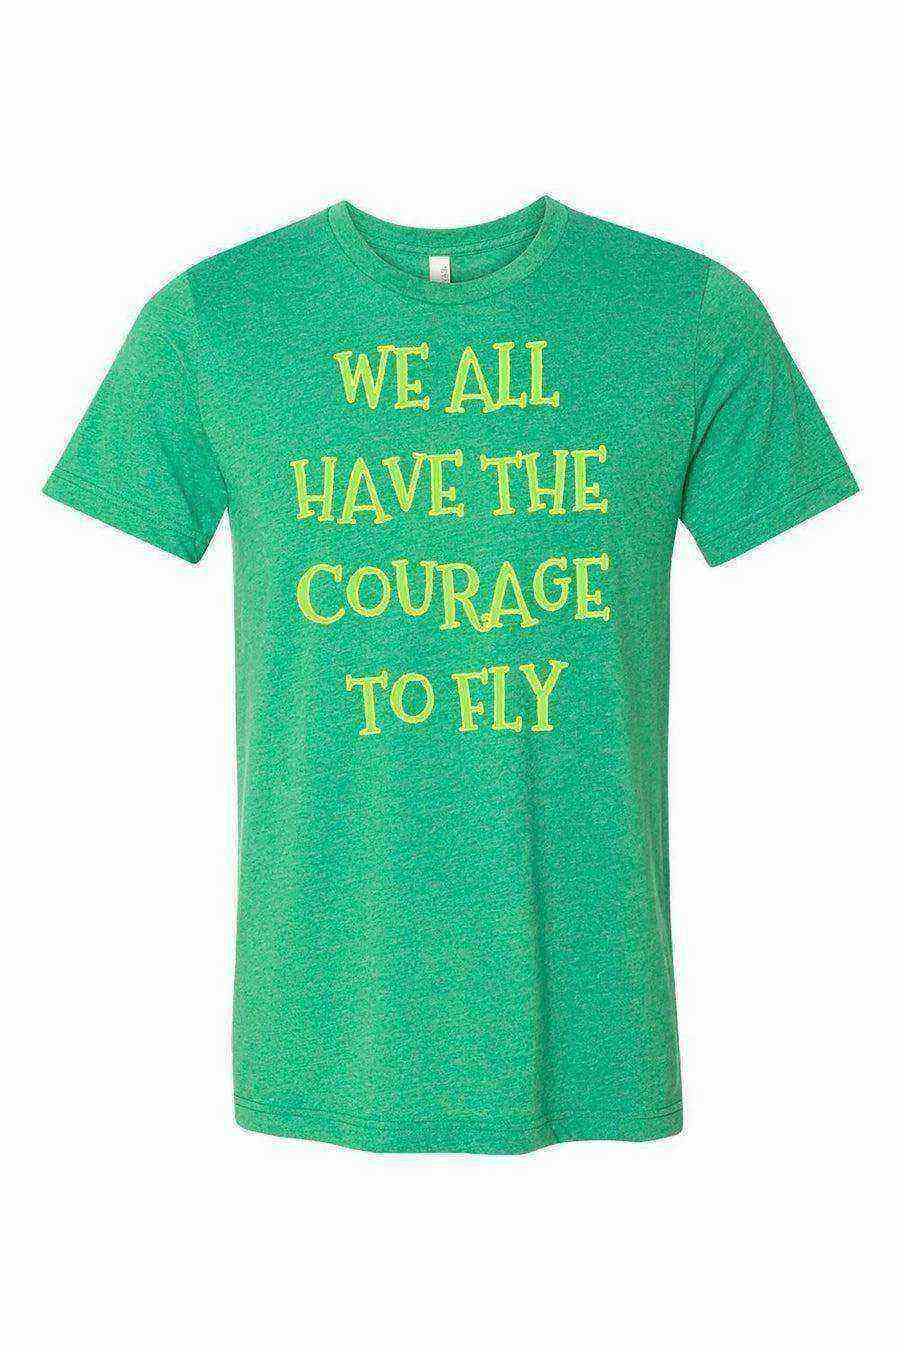 Youth | We All Have The Courage To Fly Shirt | Happily Ever After Shirt - Dylan's Tees